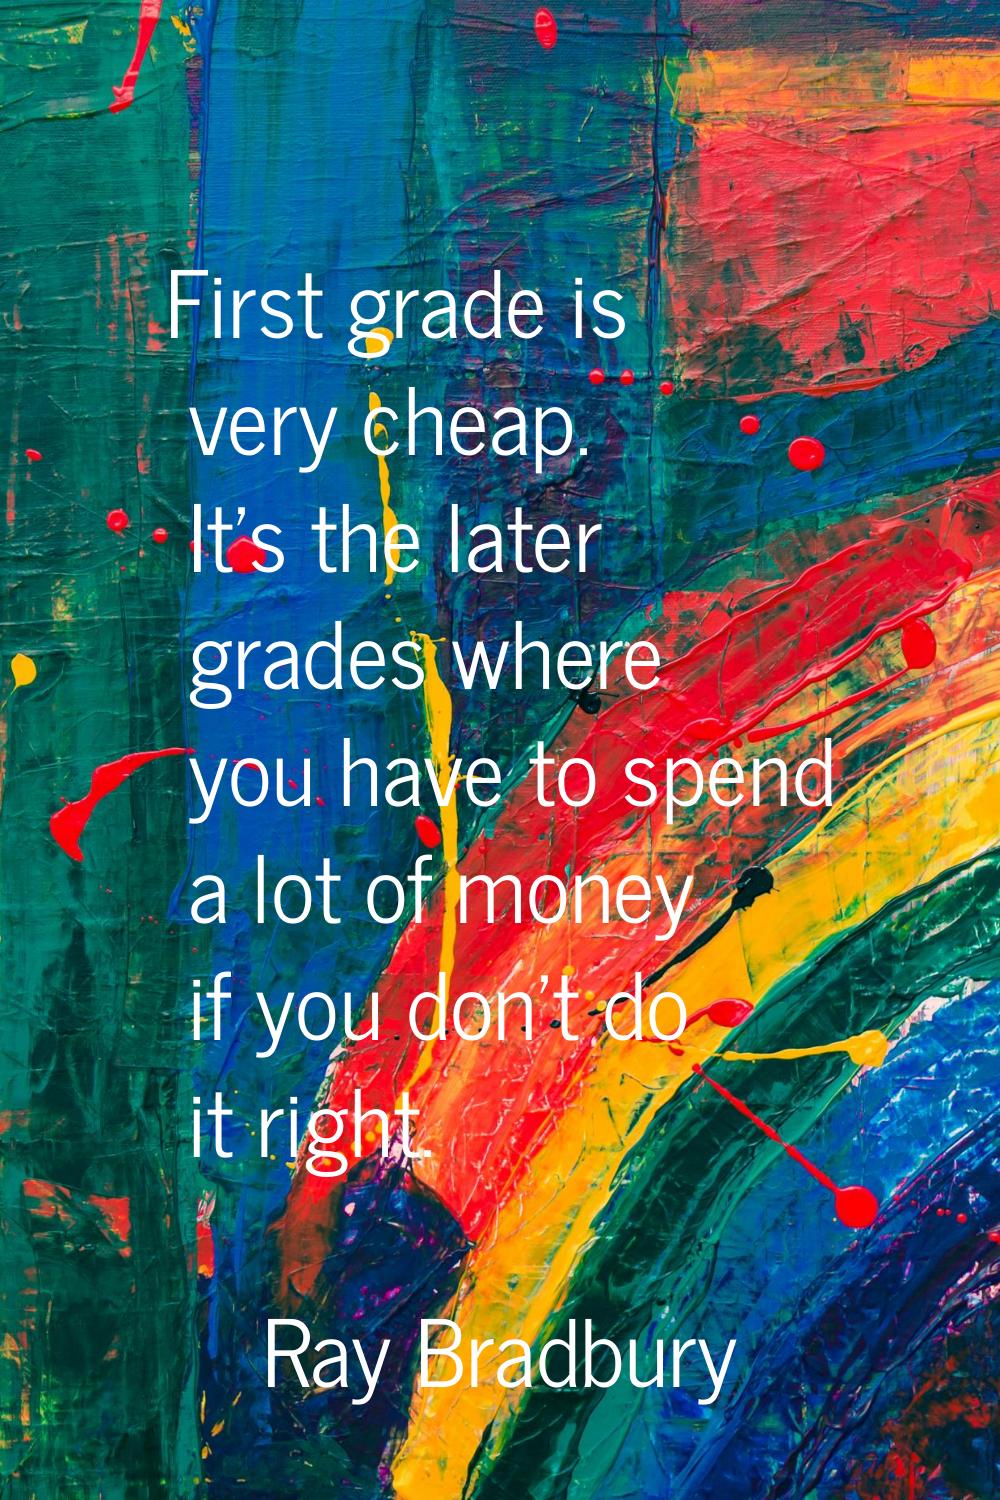 First grade is very cheap. It's the later grades where you have to spend a lot of money if you don'